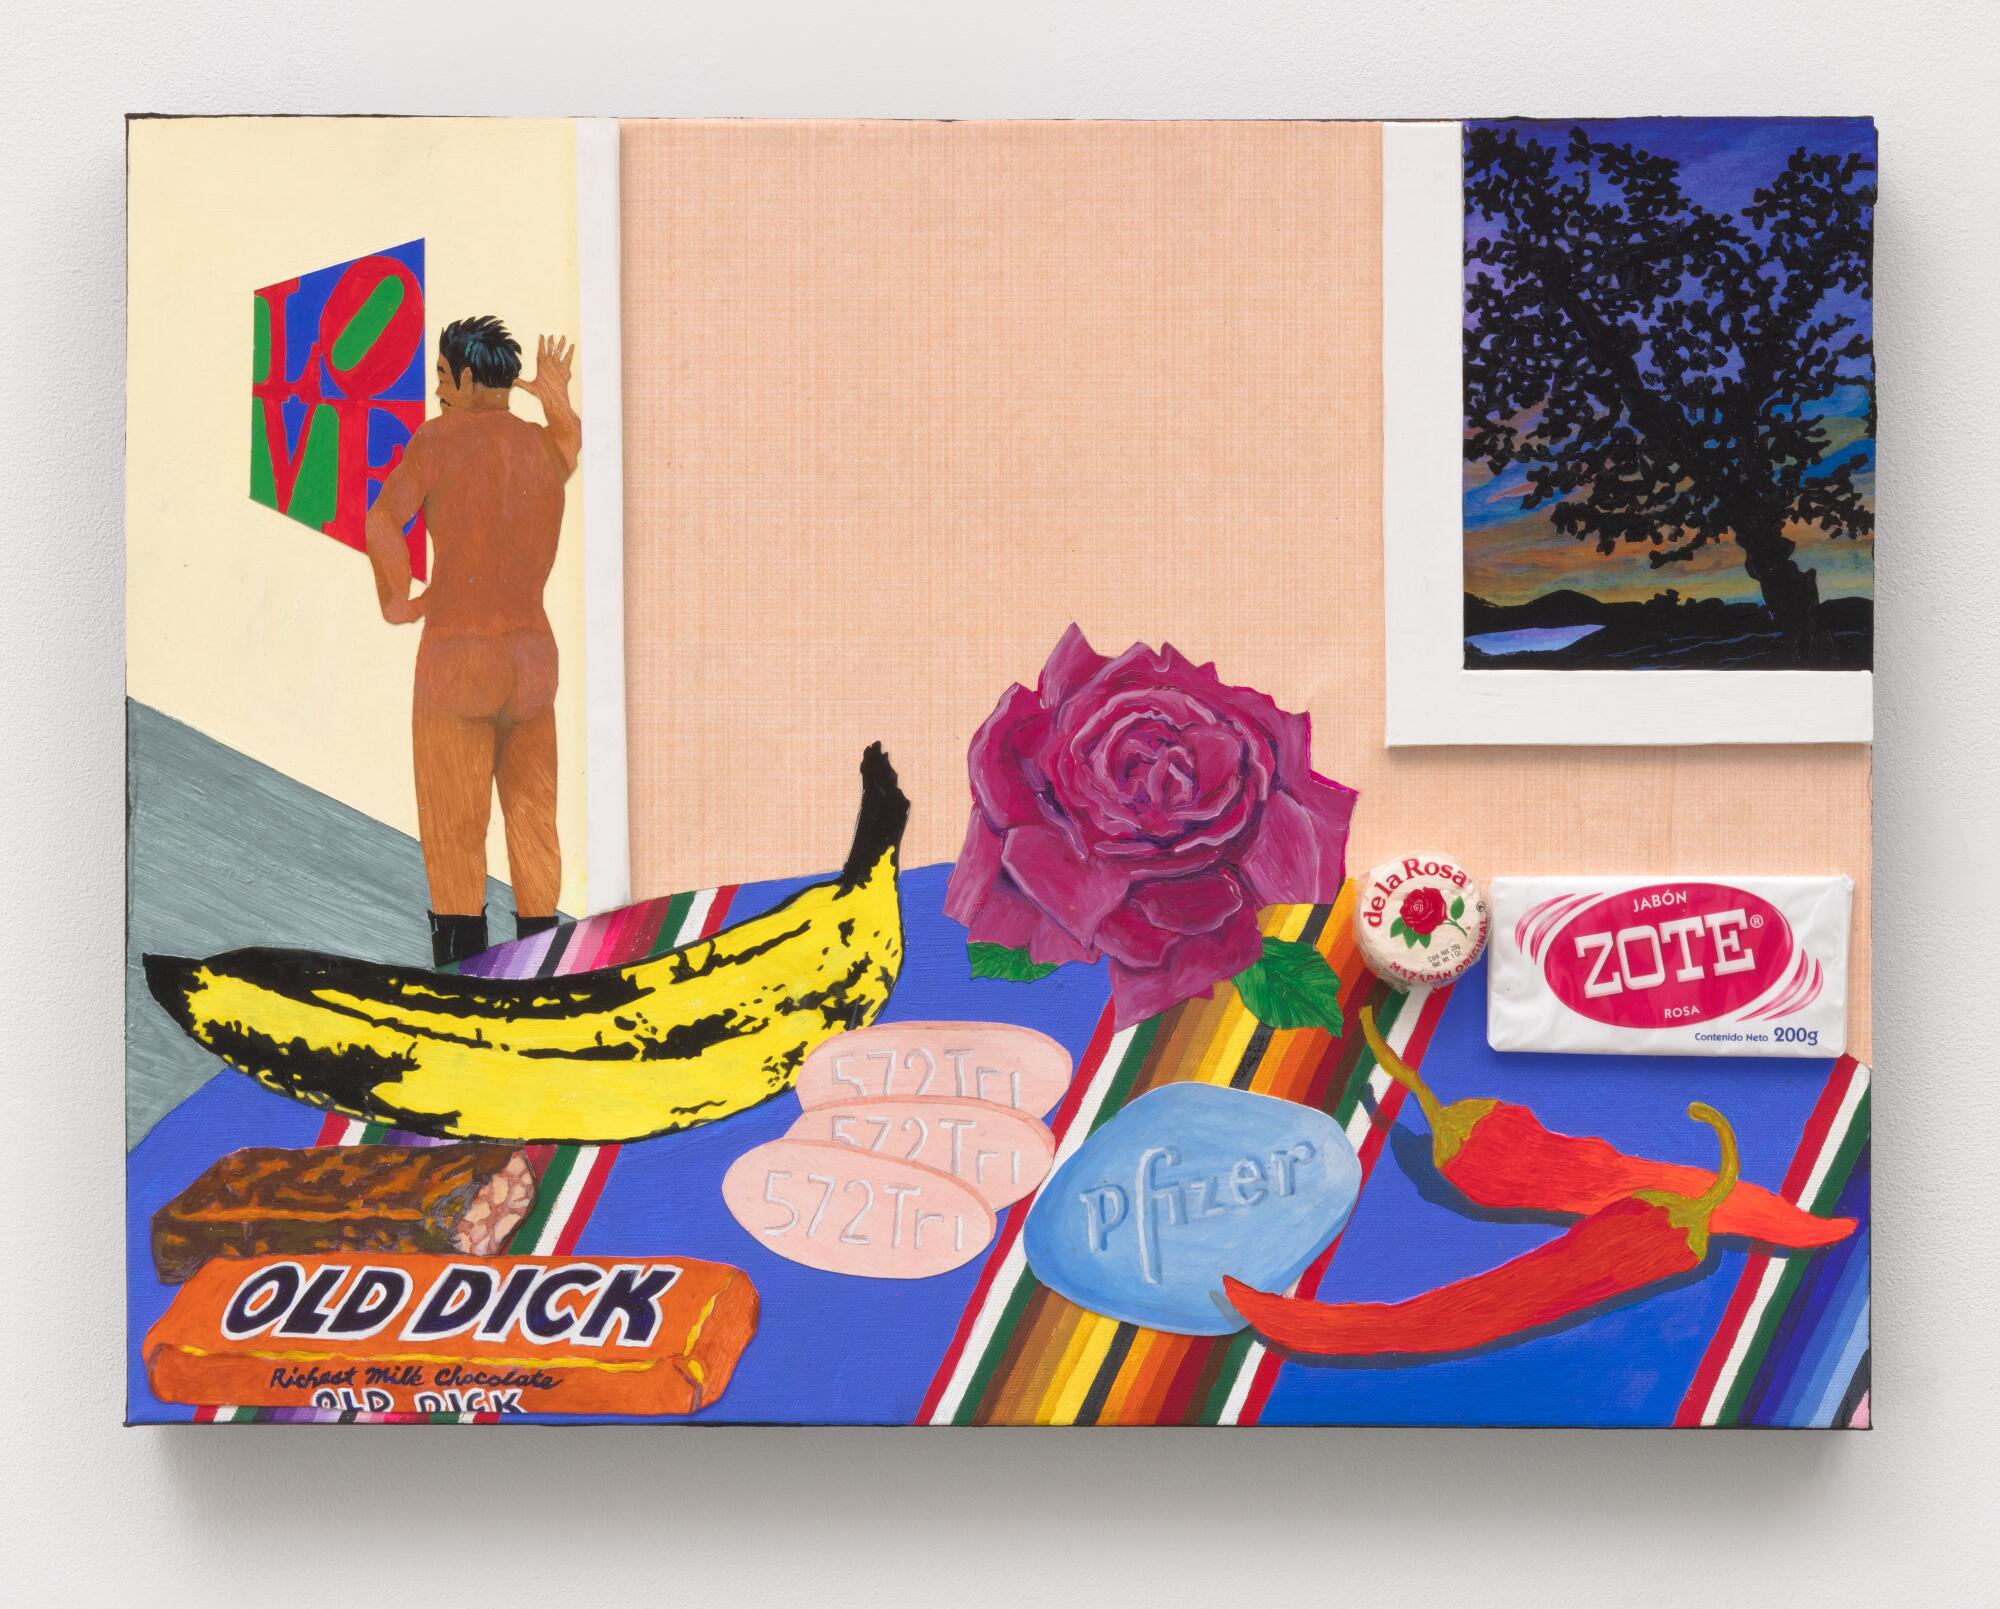 A still life by Joey Terrill features candy, HIV medication and a large banana with a nude man in the background.